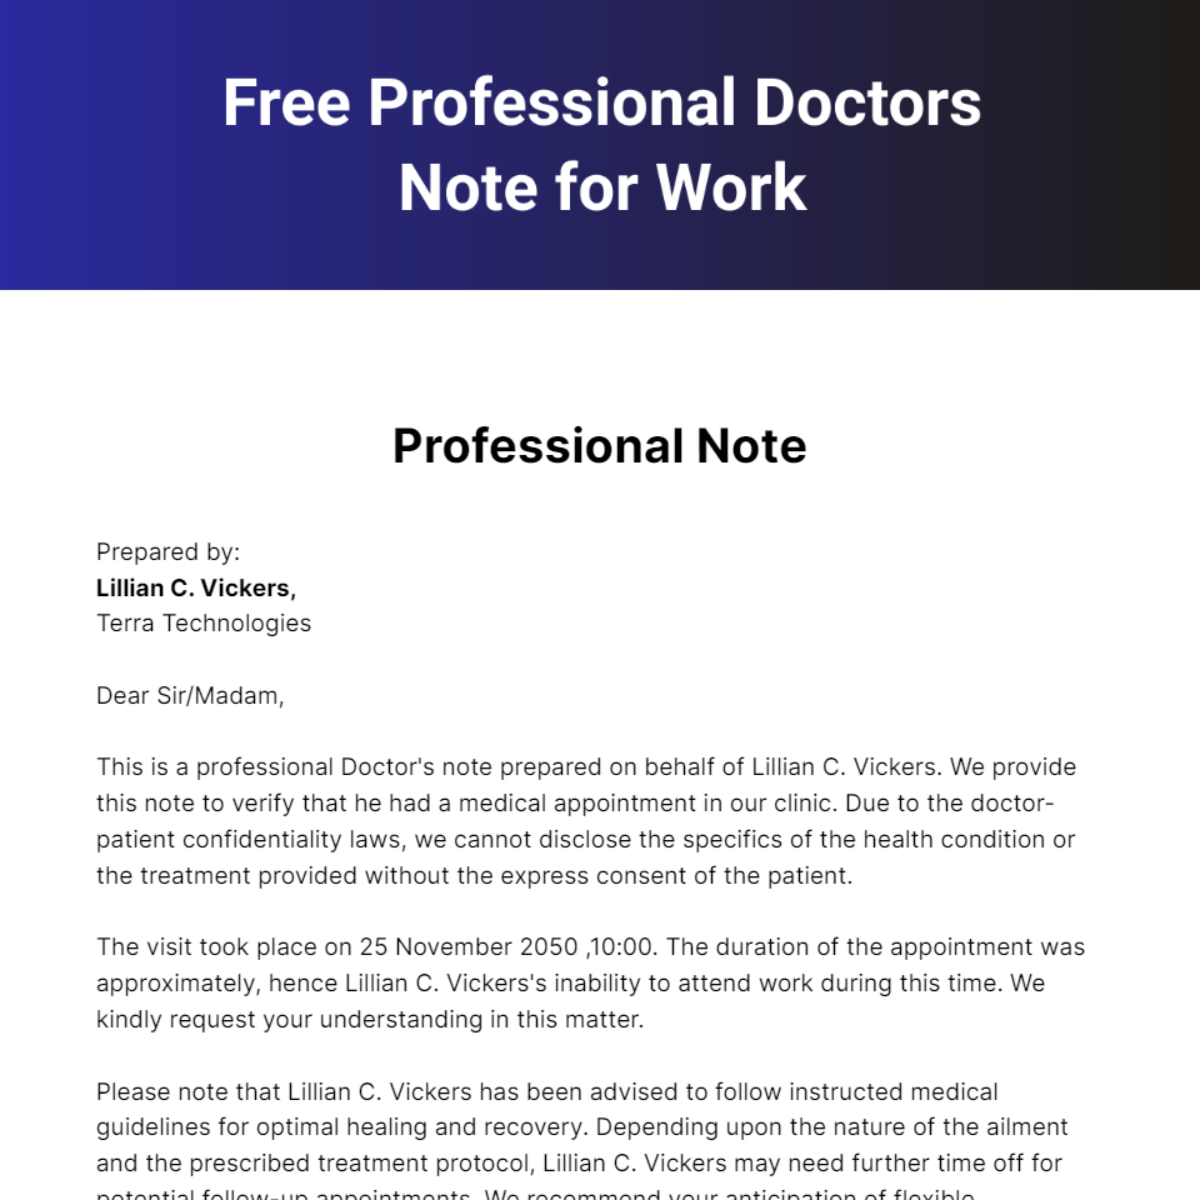 Free Professional Doctors Note for Work Template